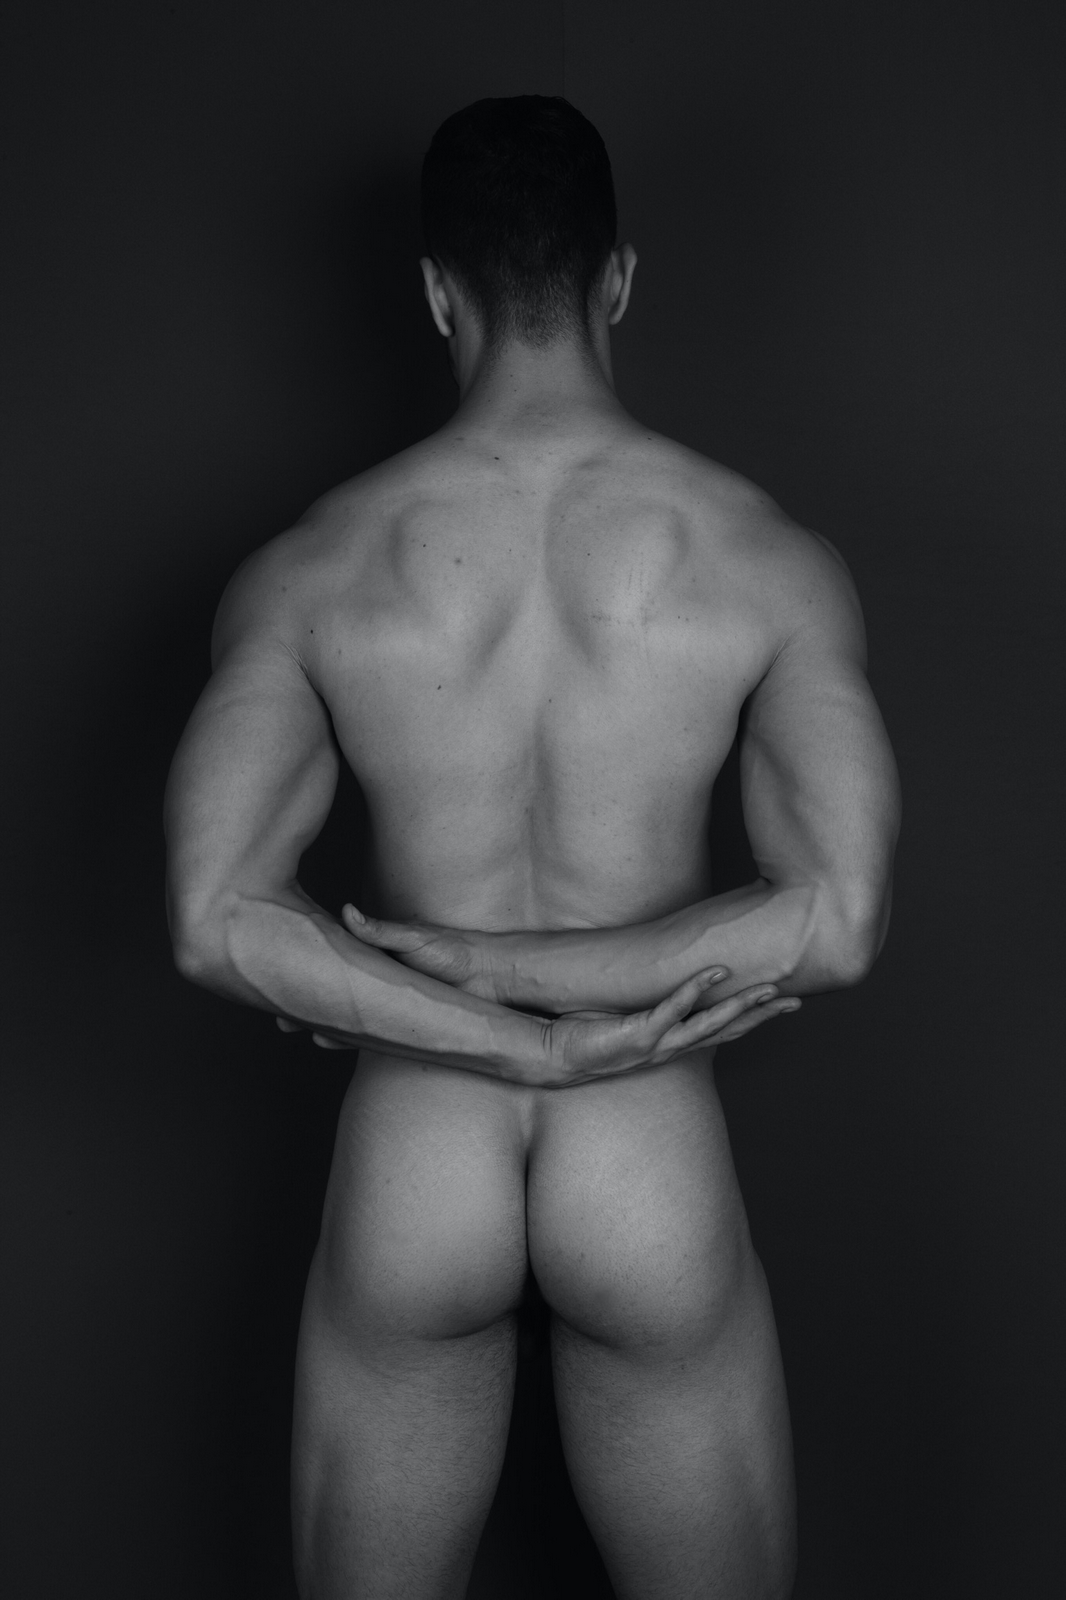 MenS SanA in CorporE SanO (IV), by Marcelo Magnani ft Tiago Volpato (NSFW).